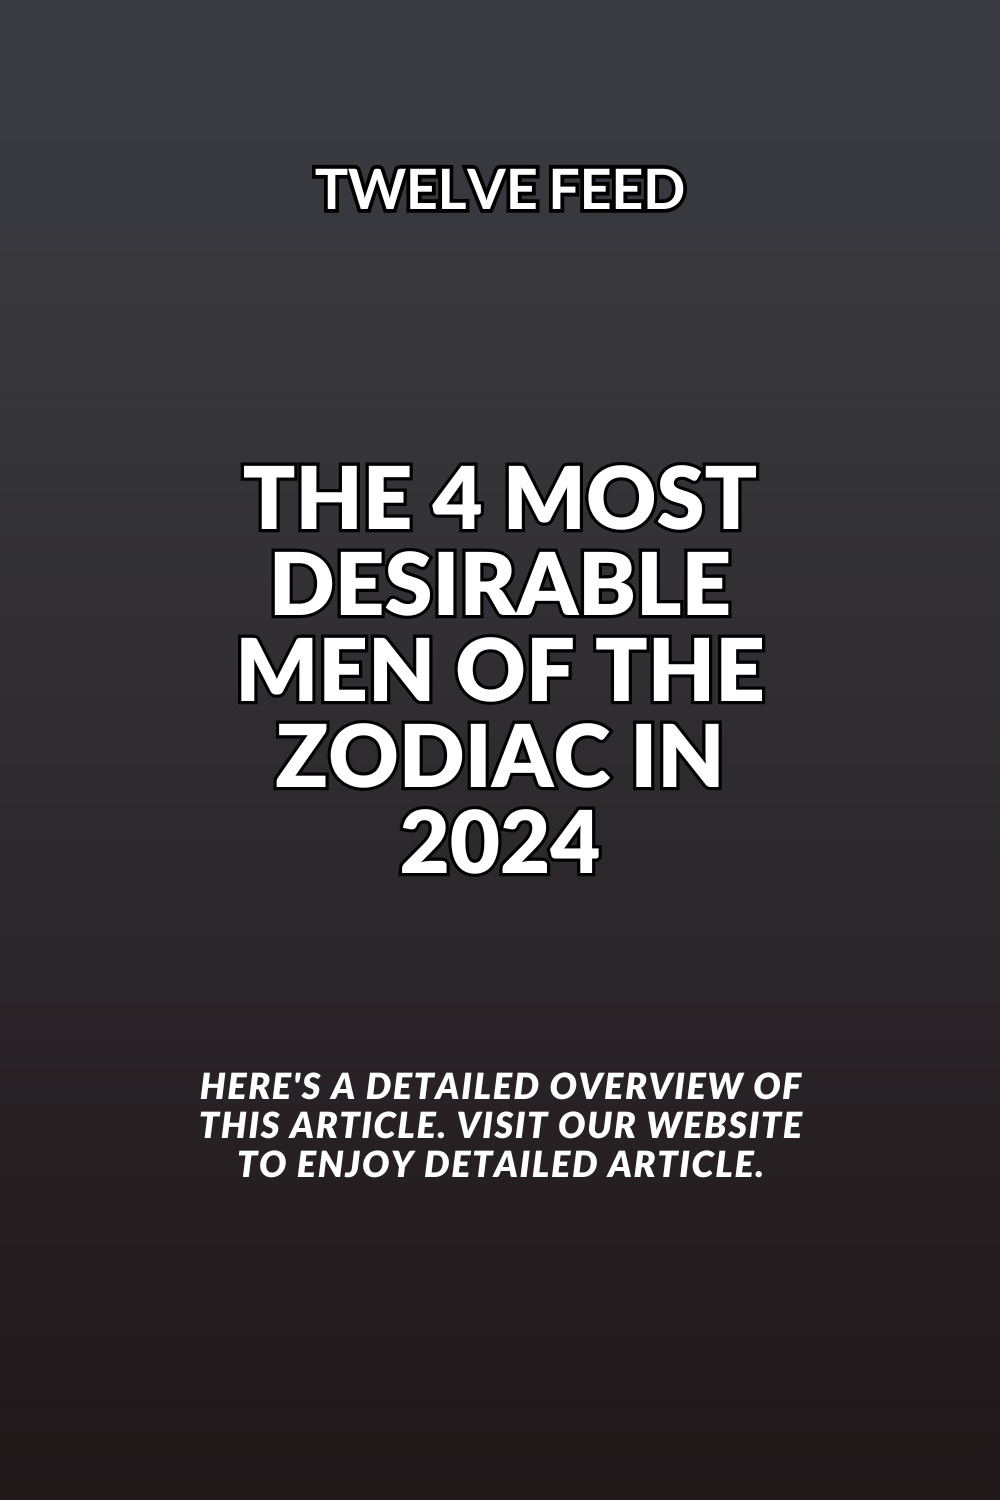 The 4 Most Desirable Men Of The Zodiac In 2024